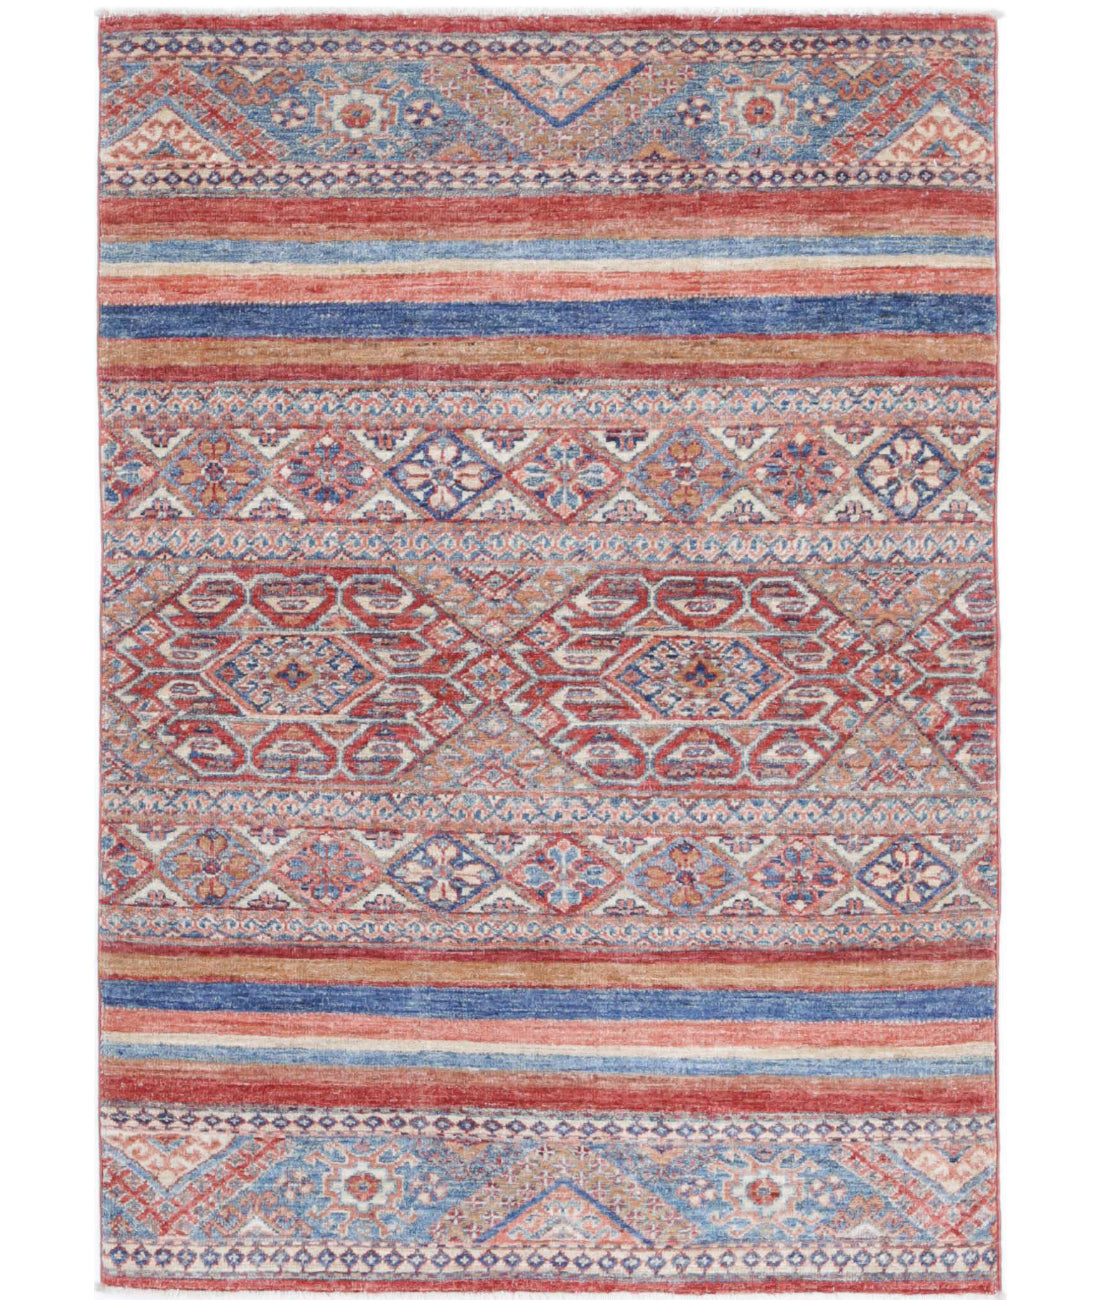 Hand Knotted Khurjeen Wool Rug - 2'11'' x 4'4'' 2'11'' x 4'4'' (88 X 130) / Multi / Multi